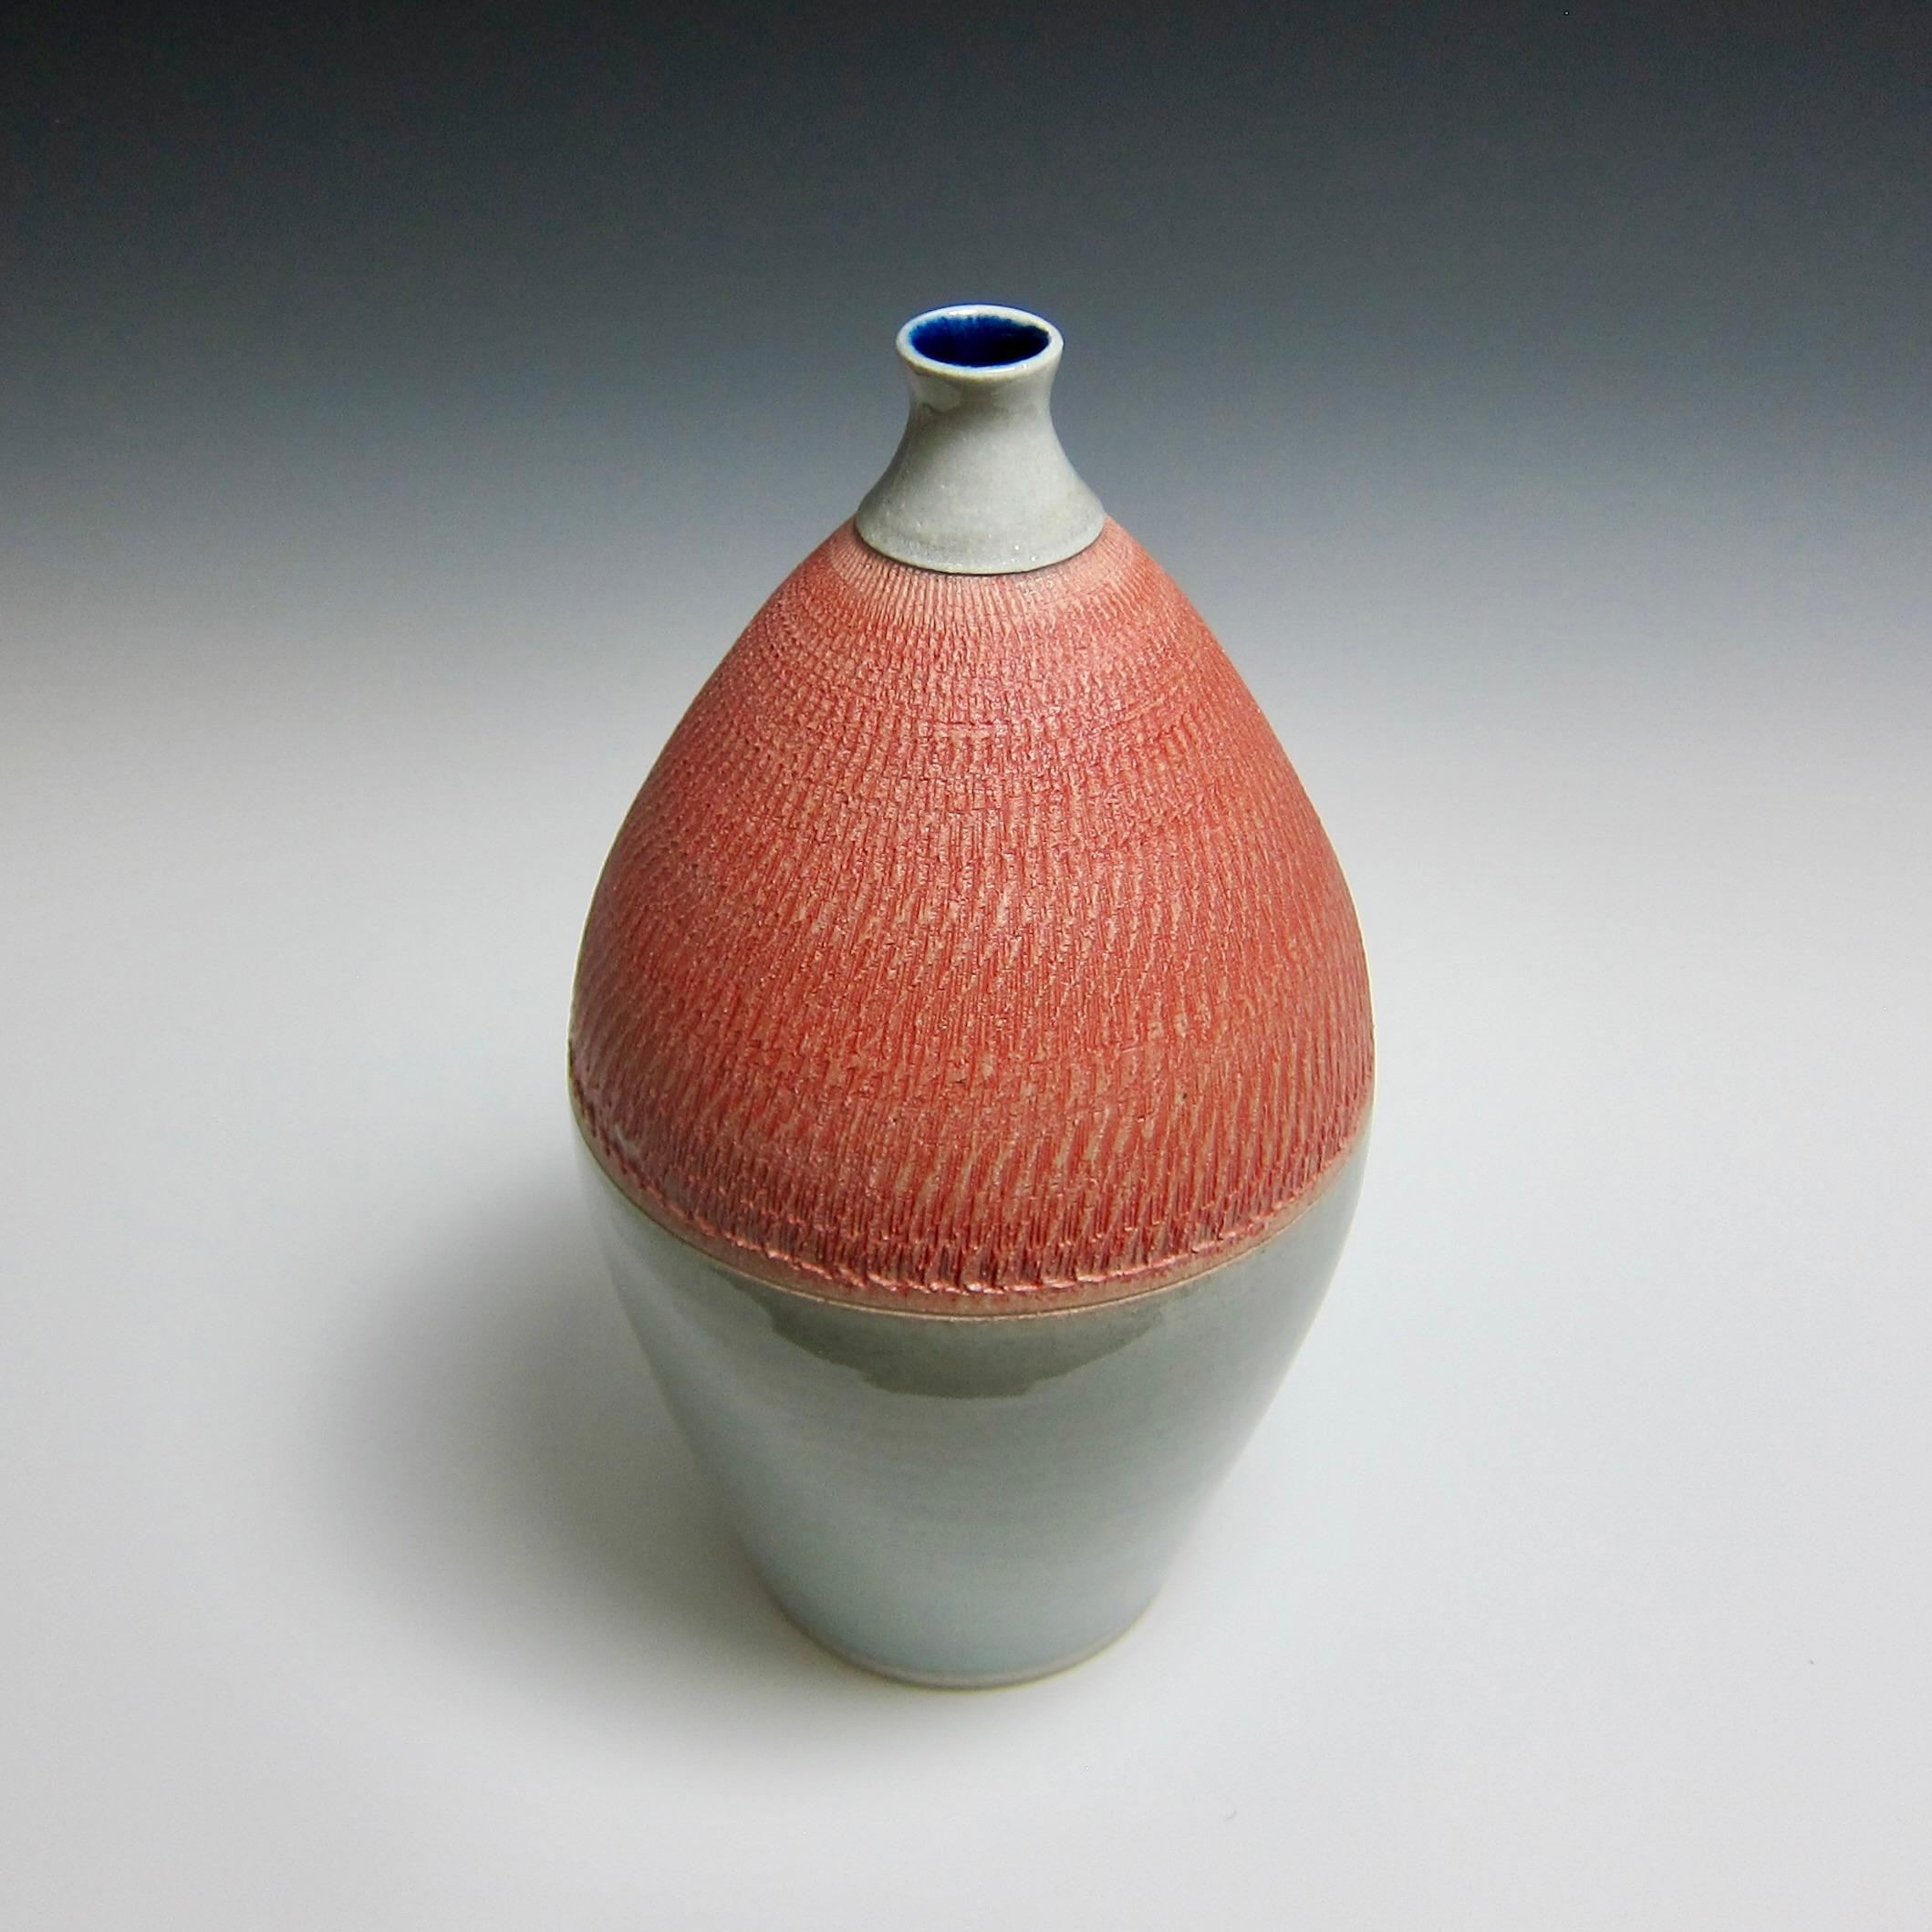 Wheel Thrown Bottle With Chattering by Jason Fox.

A Southern Californian for over half his life, Contemporary Ceramic Artist Jason Fox draws upon his classical education in Architecture and Art History as well as his love of surfing and the ocean.